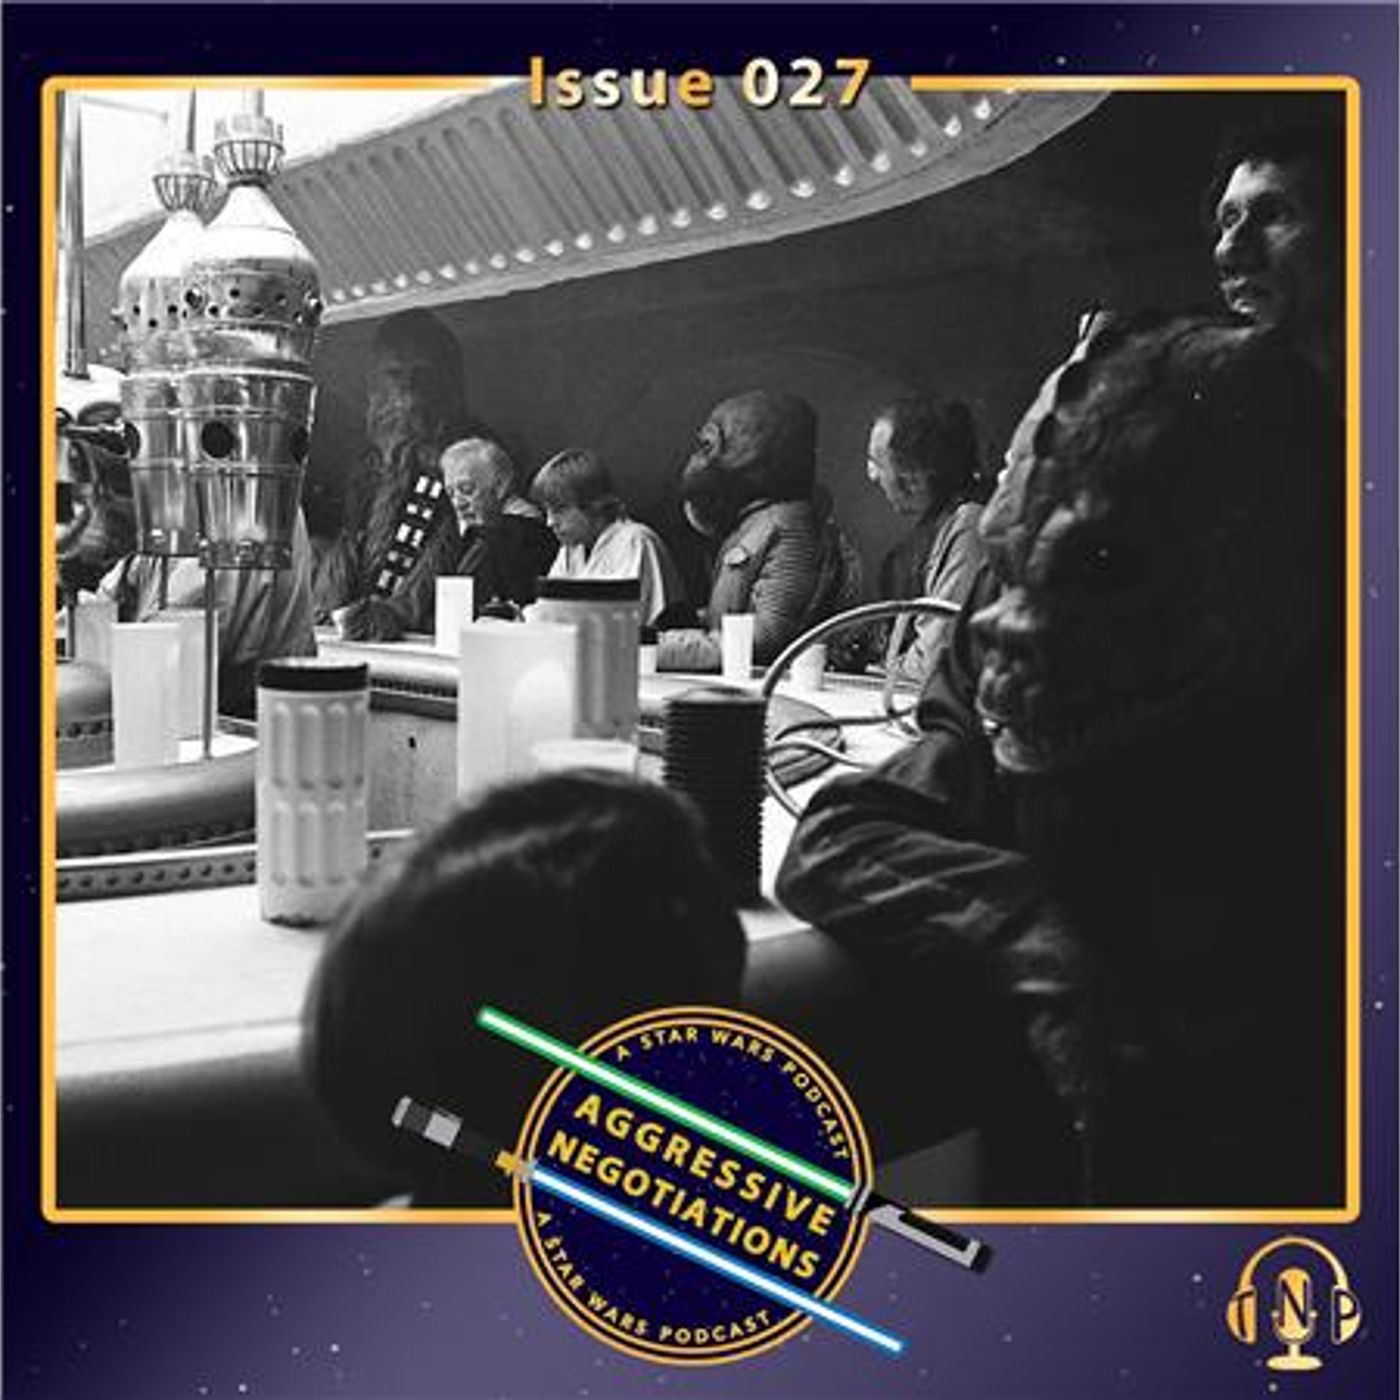 Issue 027: The Star Wars Show (Pitches)